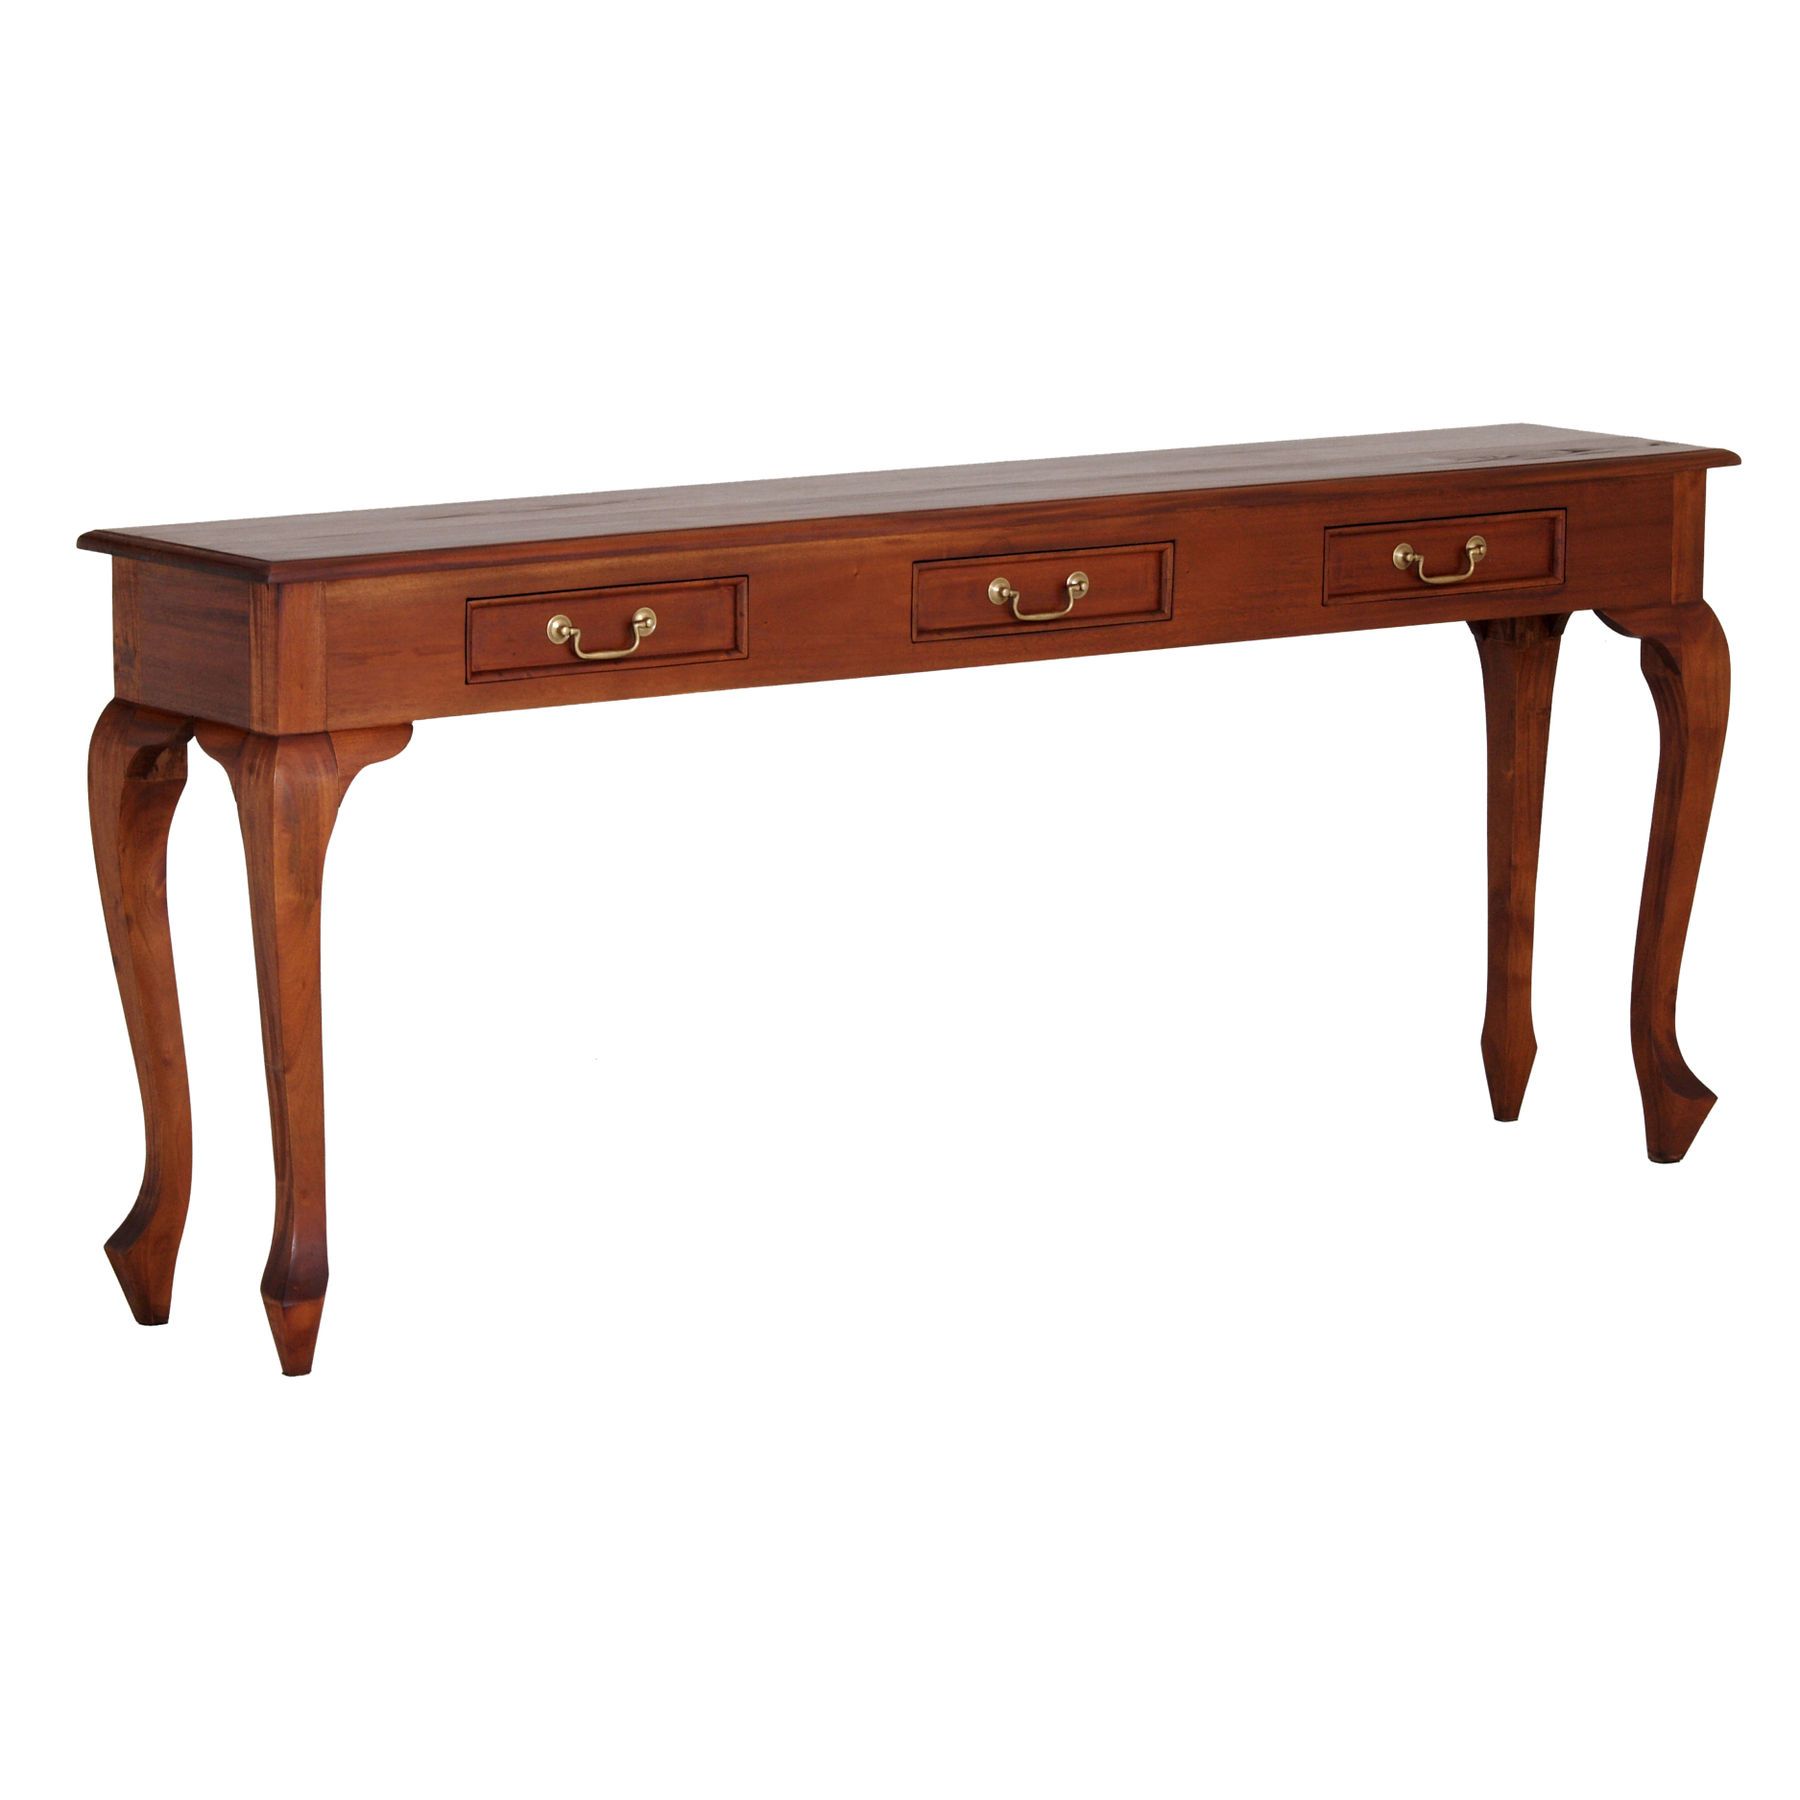 Annalise 3 Drawer Timber Console Table, Pecankayu With Warm Pecan Console Tables (View 18 of 20)